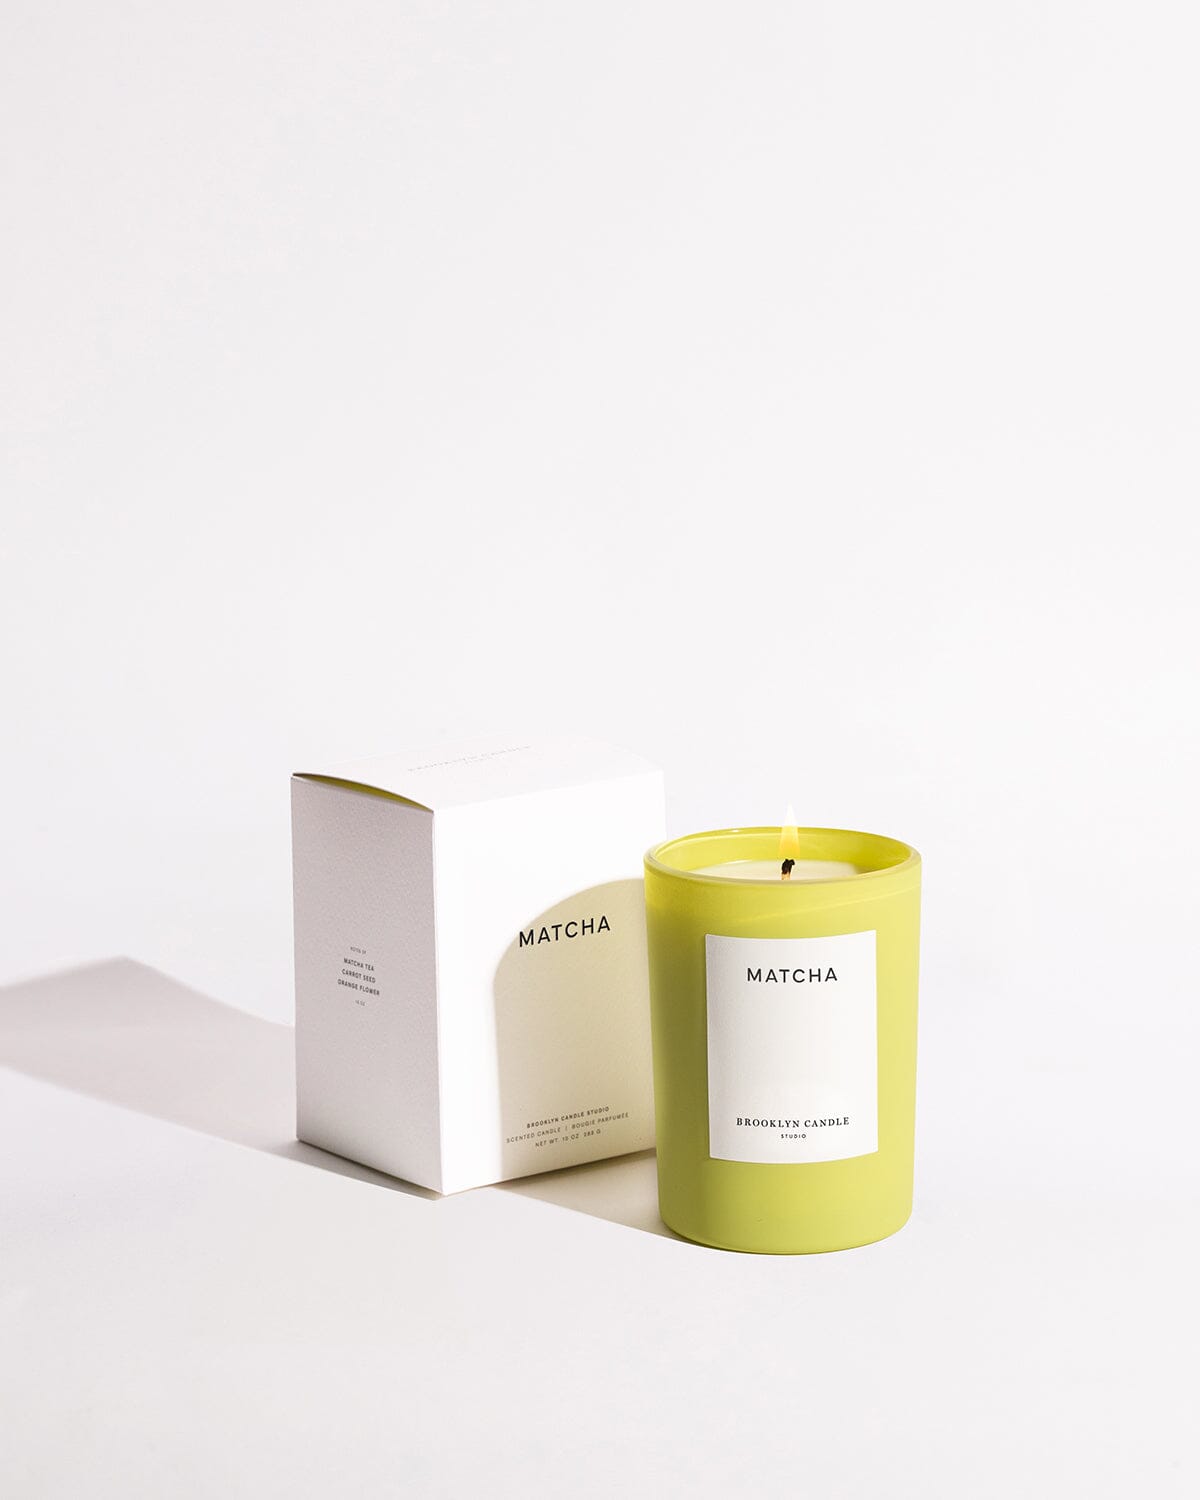 Matcha Summer Edition Candle Herbarium Collection Brooklyn Candle Studio 